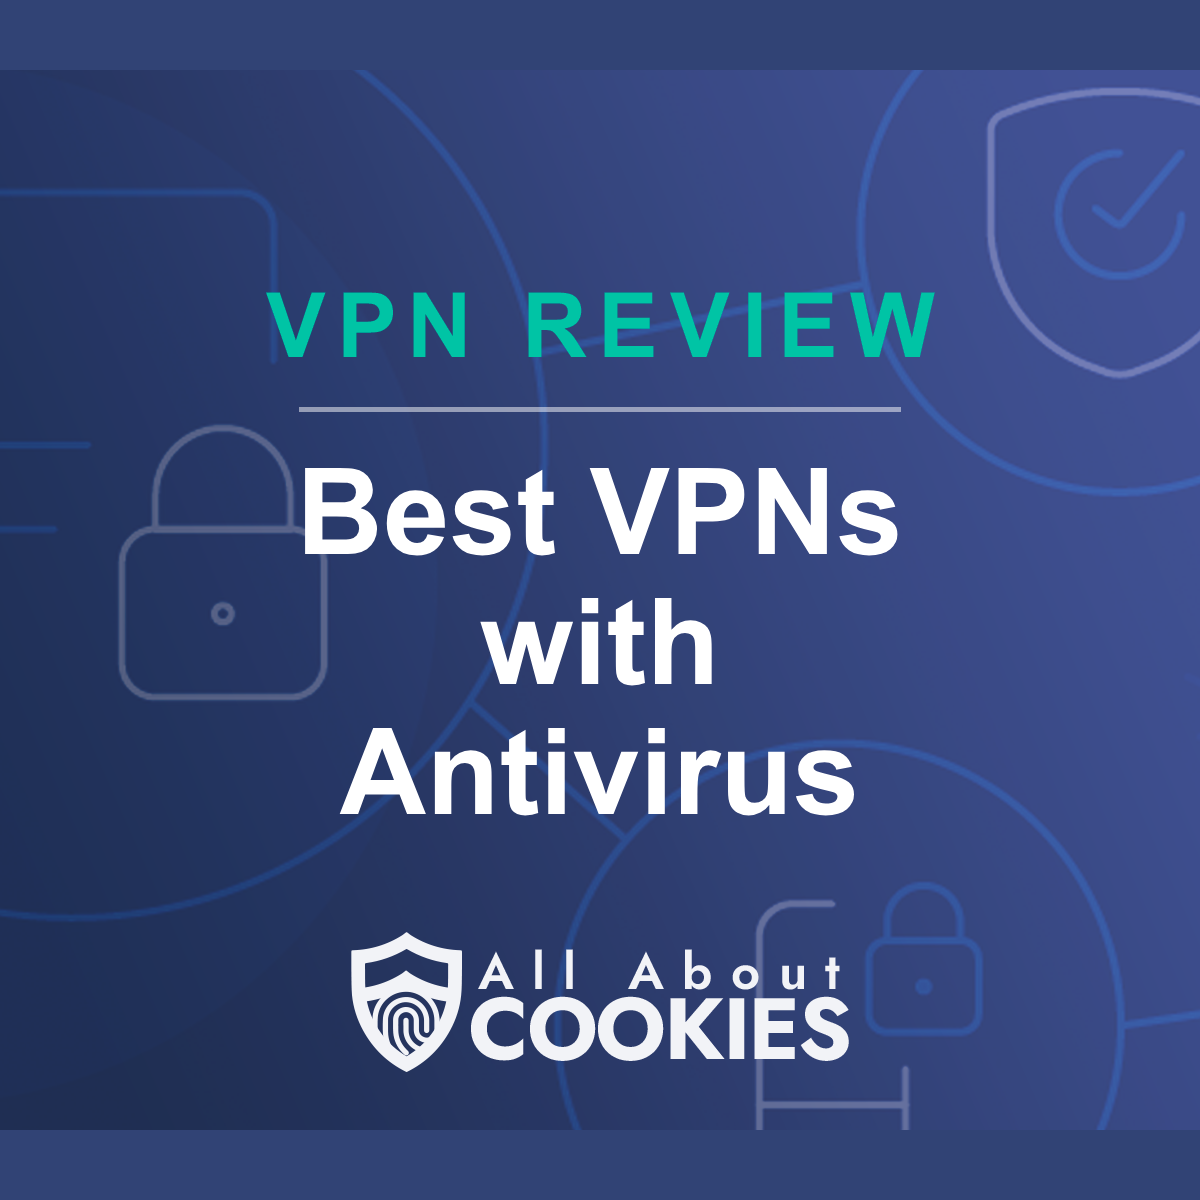 A blue background with images of locks and shields with the text &quot;Best VPNs with Antivirus&quot; and the All About Cookies logo. 